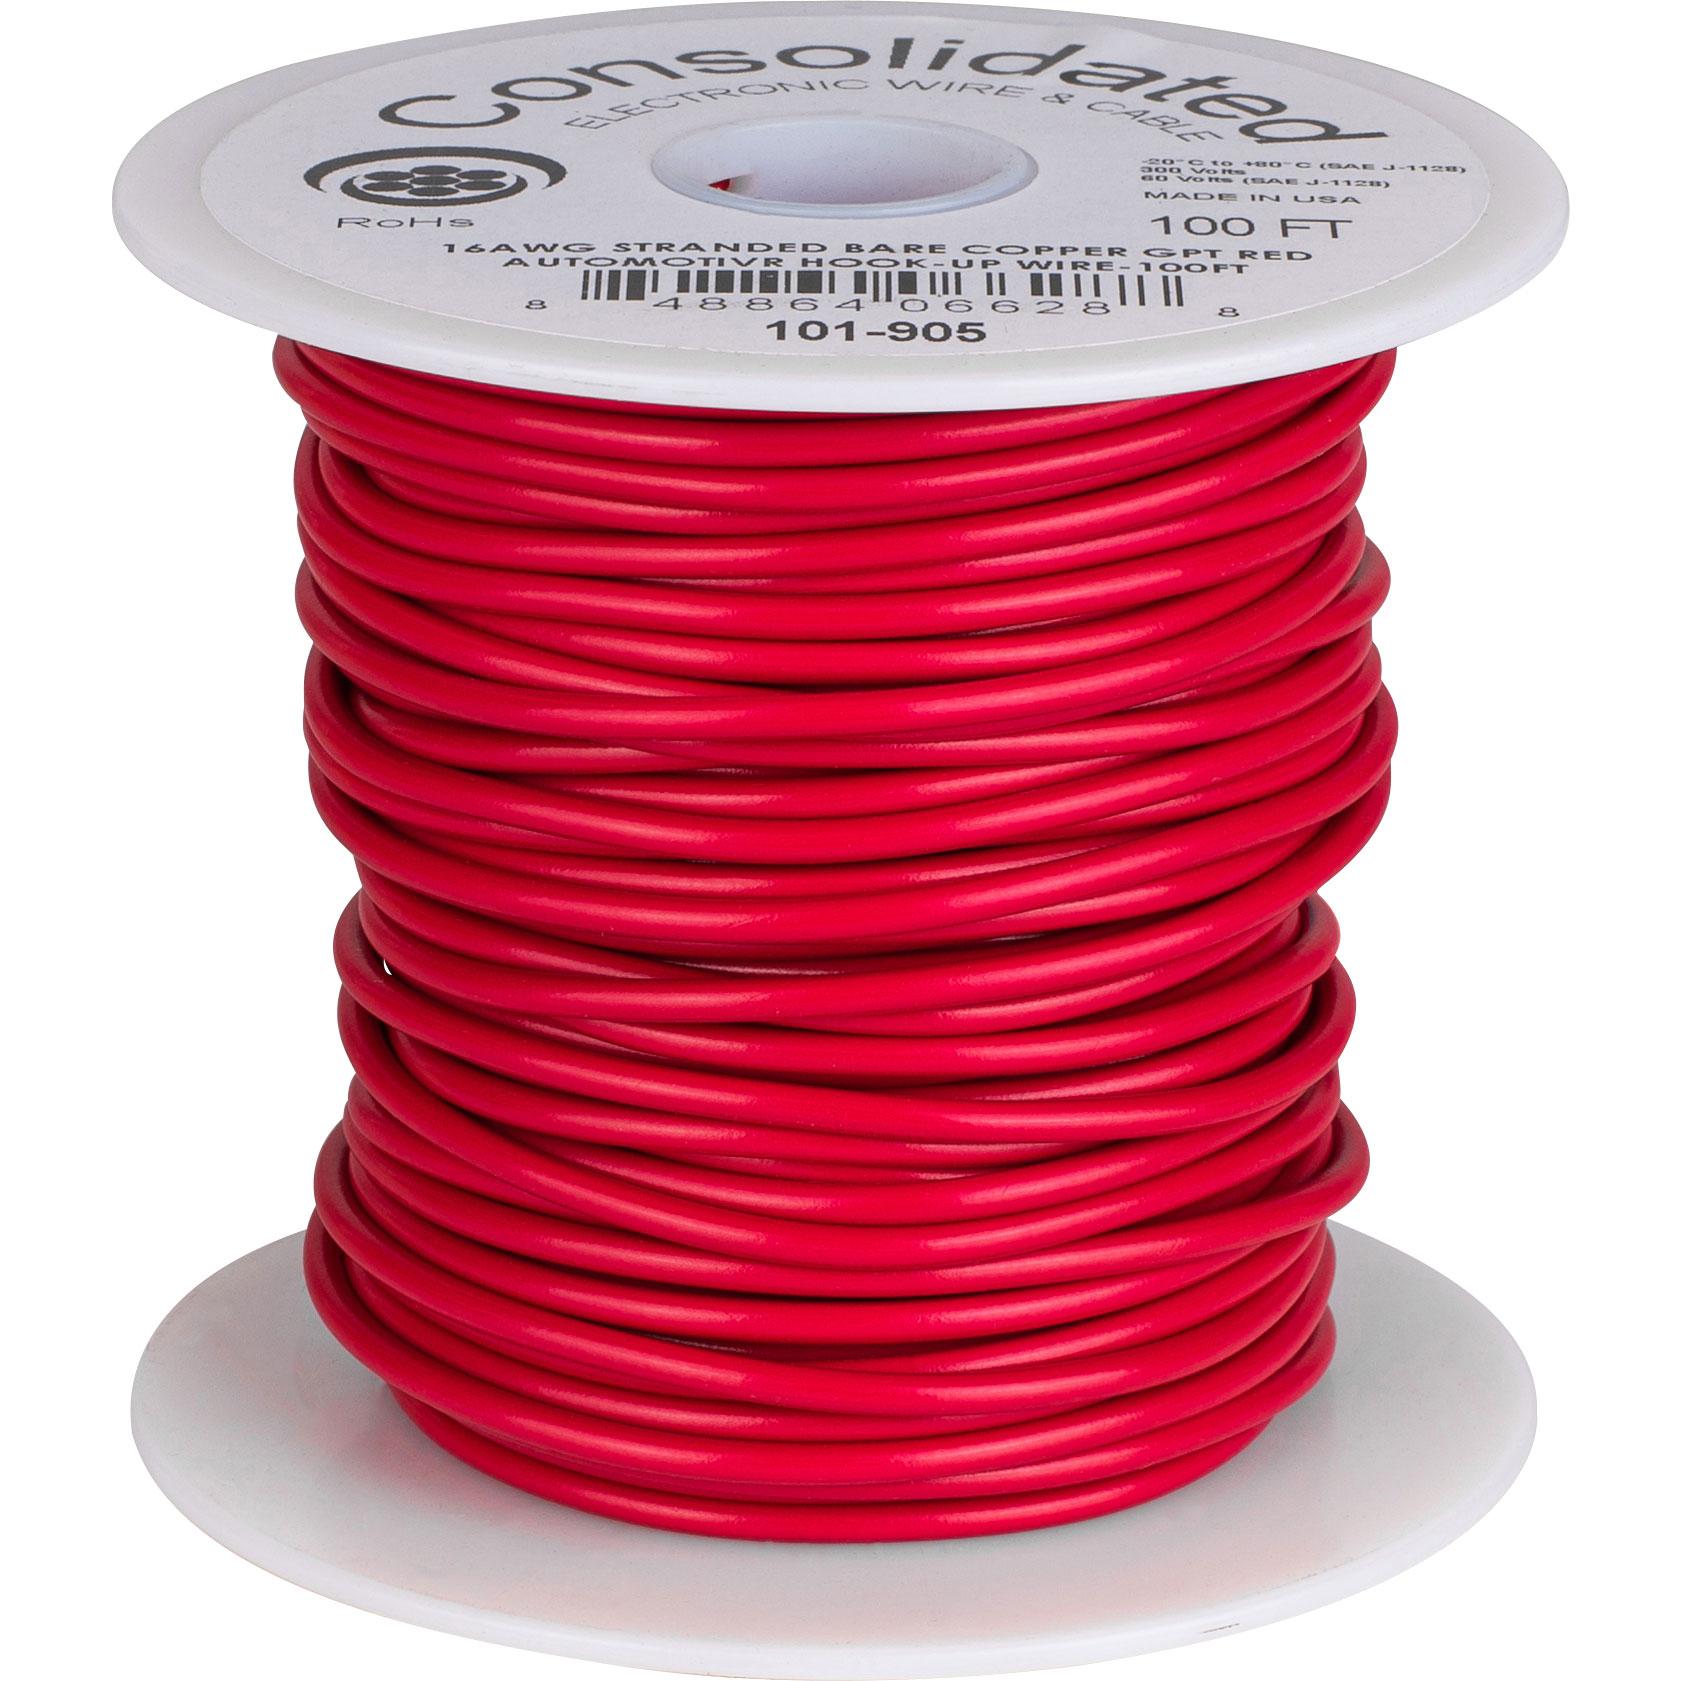 Awg Stranded Wire